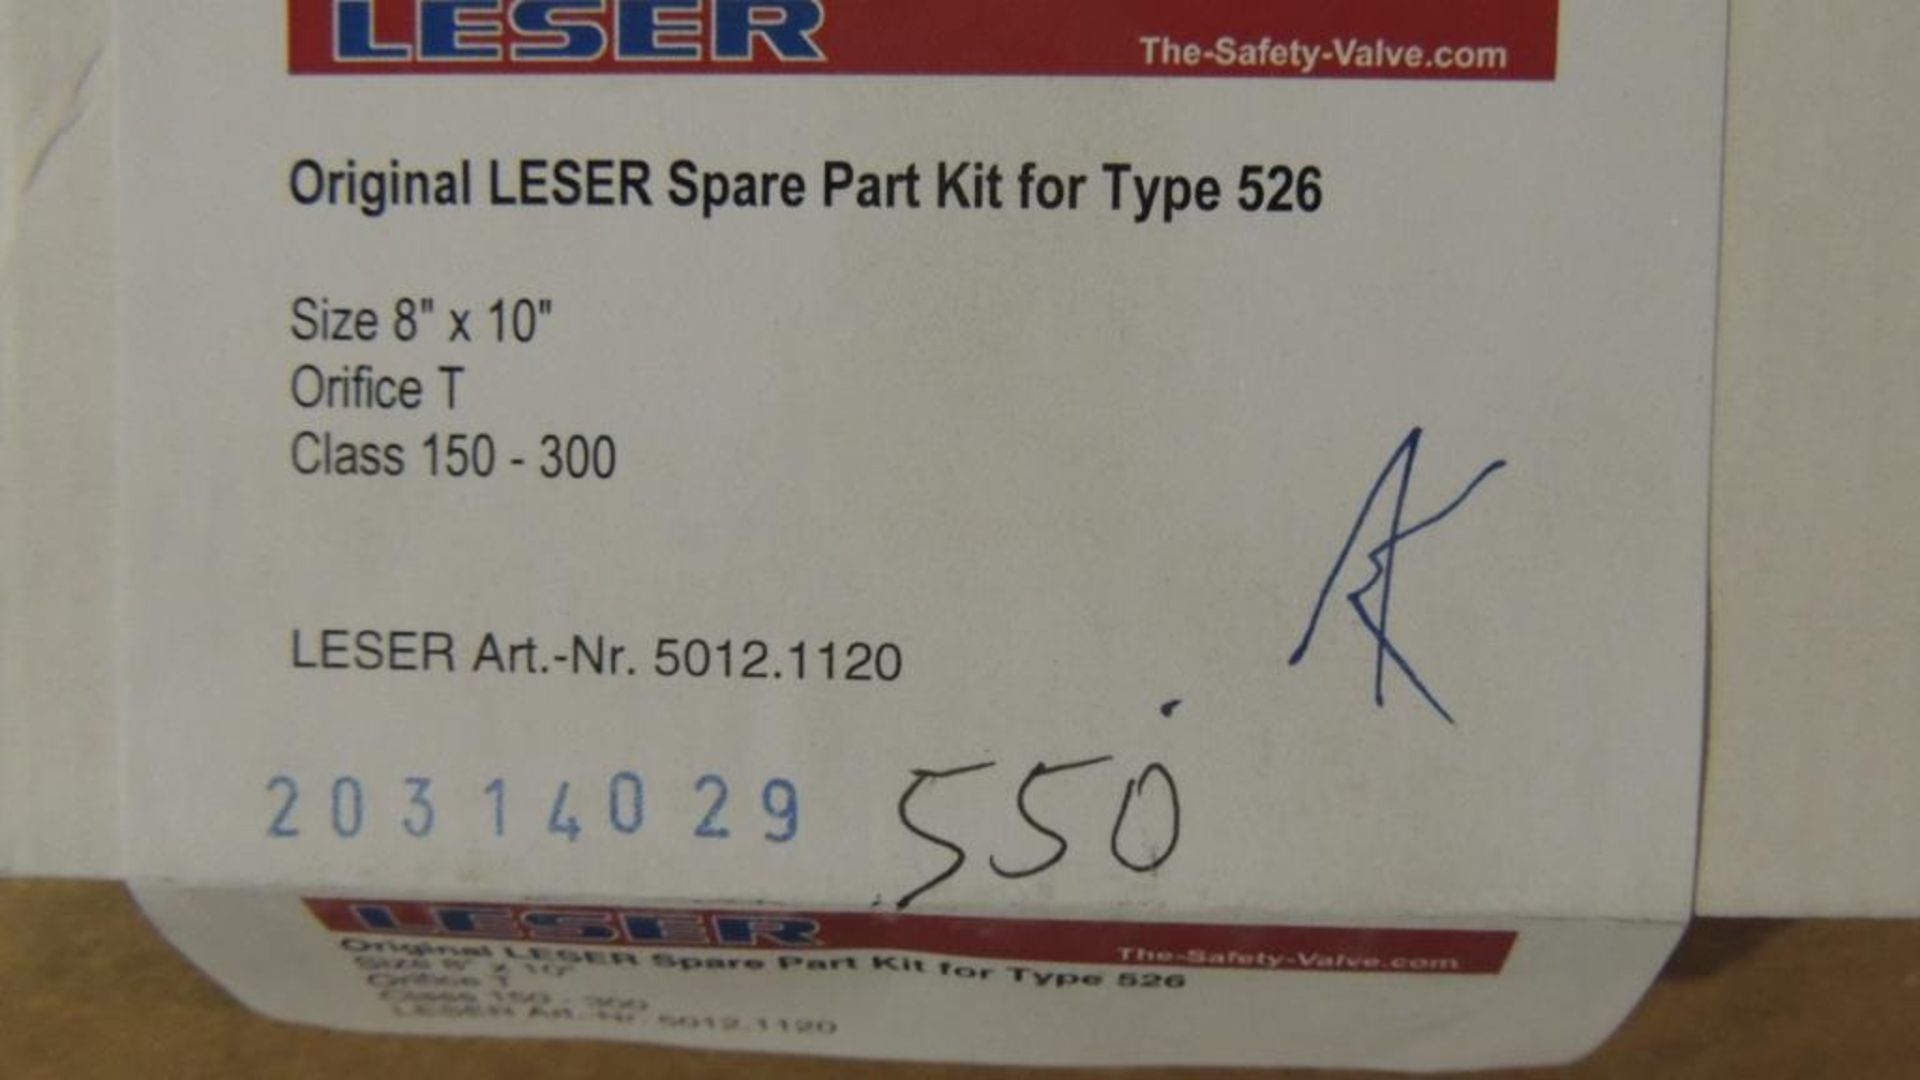 Large Quantity of Leser Relief and Safety Valves, plus Spare Parts Kits - Image 31 of 374